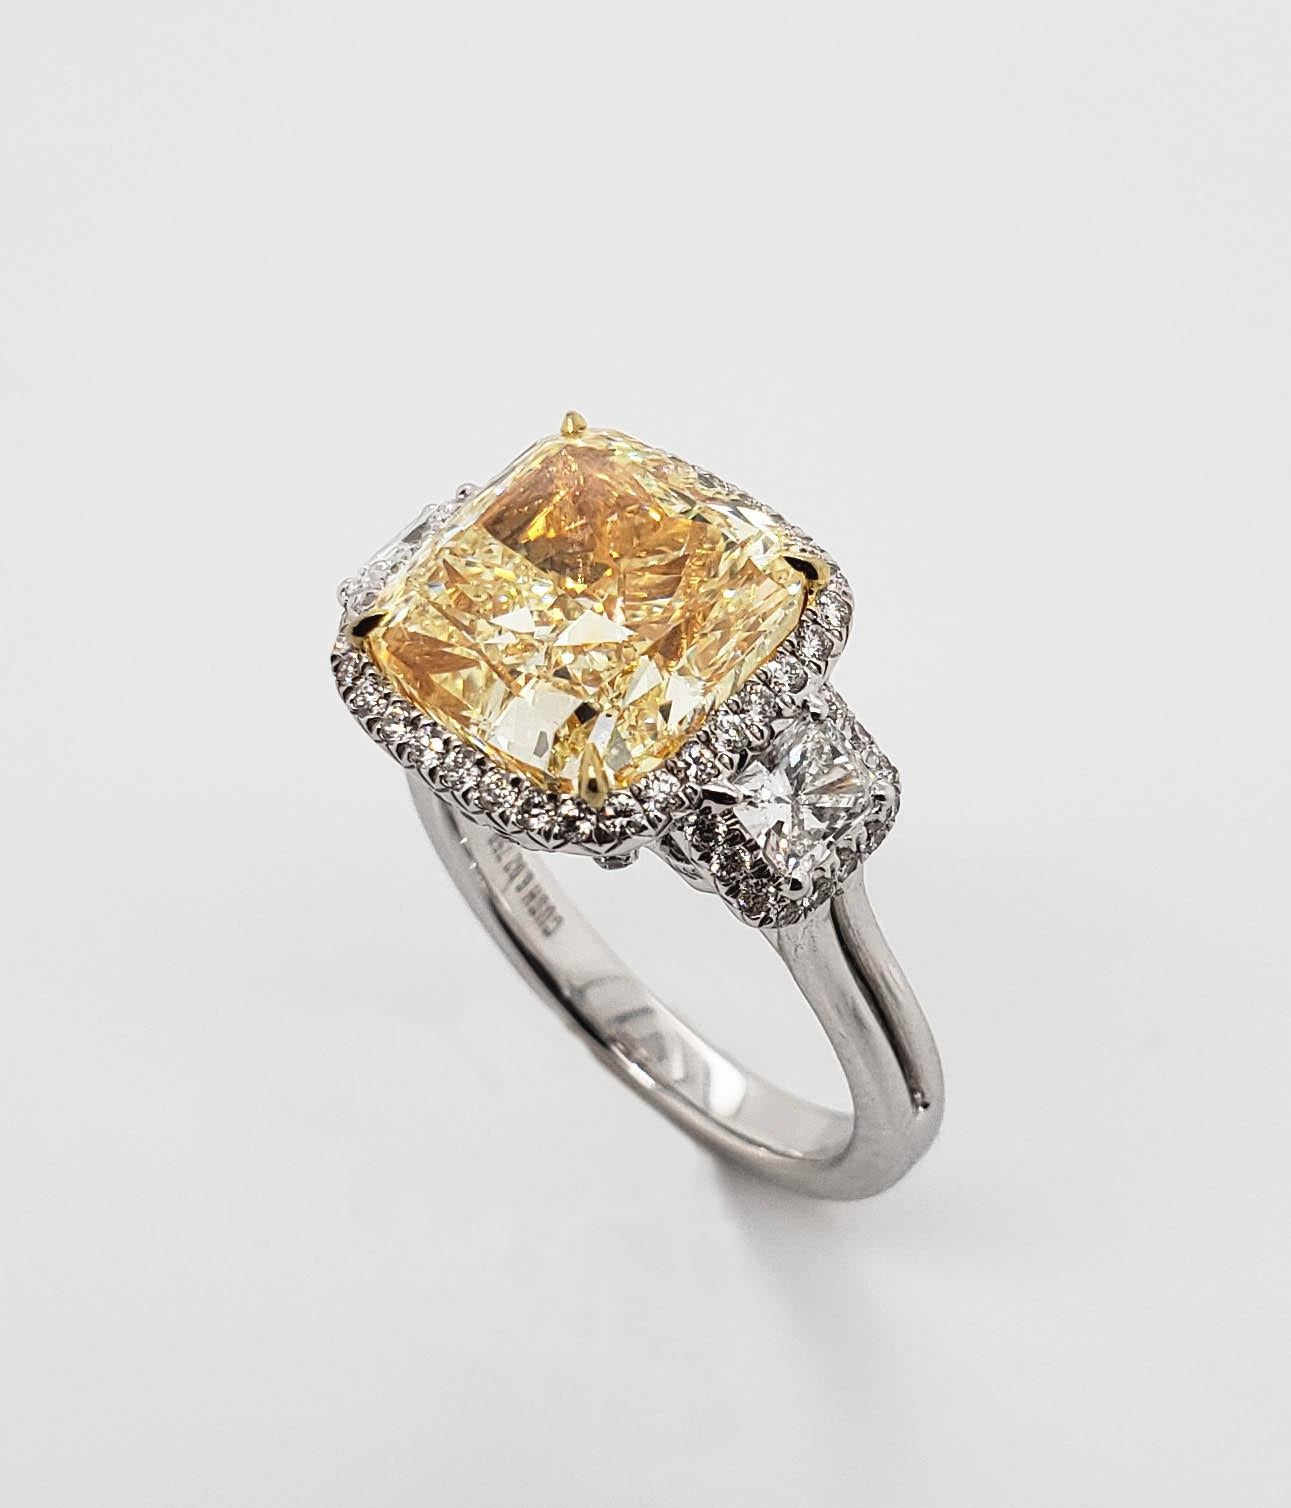 From SCARSELLI, this beautiful statement ring features a 6.02 carat Fancy Yellow Cushion Cut Diamond of VS2 clarity flanked with radiant cut F color diamonds (.20 each) and framed in round white diamonds.  See pictures for detailing and for the GIA